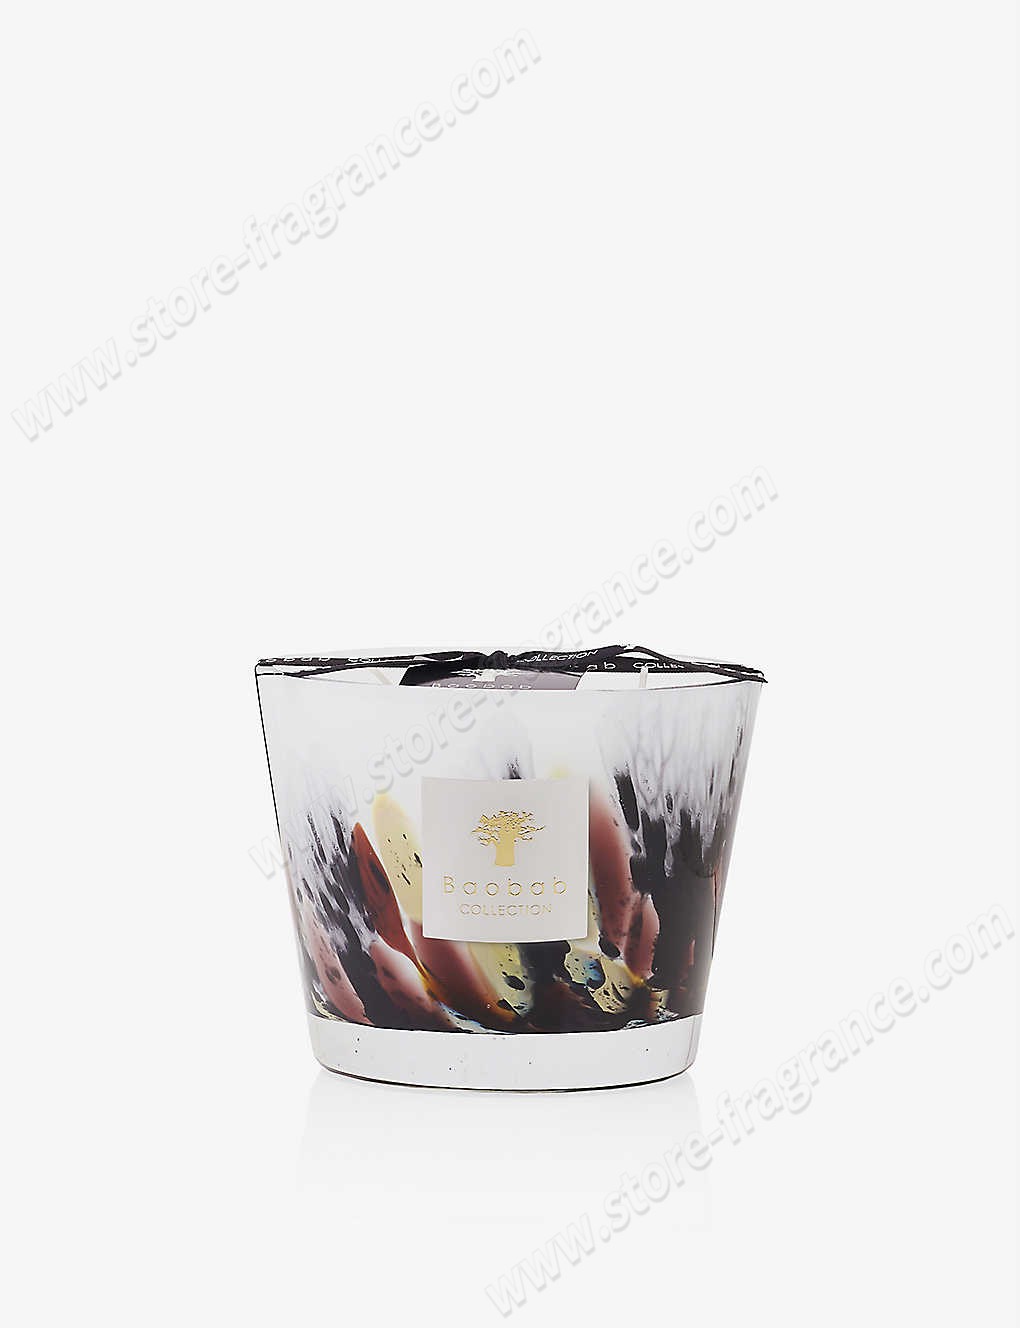 BAOBAB COLLECTION/Tanjung scented candle 500g ✿ Discount Store - BAOBAB COLLECTION/Tanjung scented candle 500g ✿ Discount Store